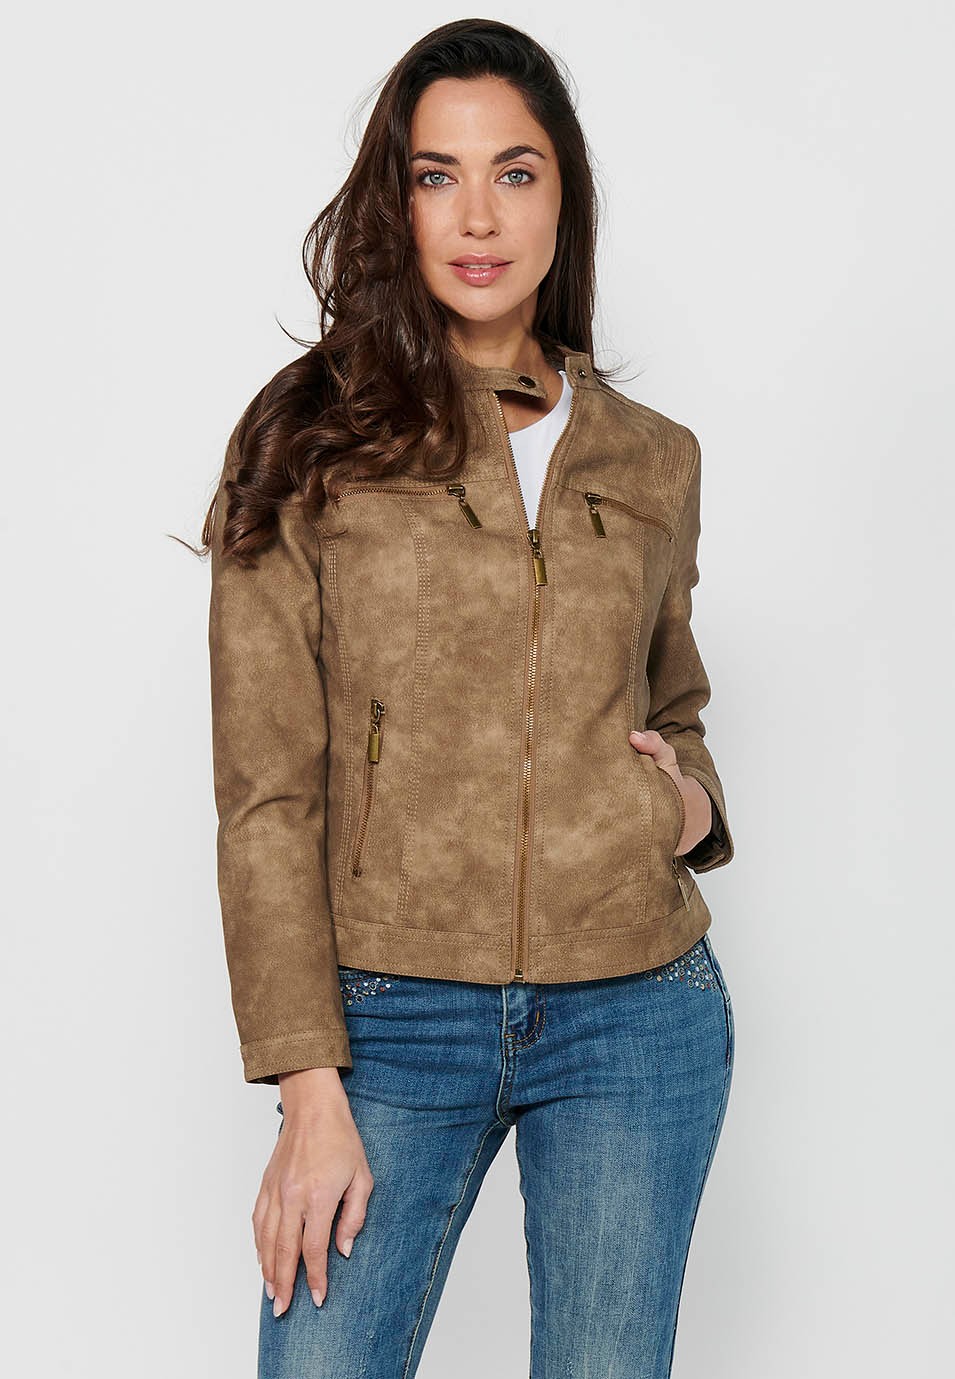 Women's Round Neck Worn Effect Long Sleeve Jacket with Stone Color Zipper Front Closure